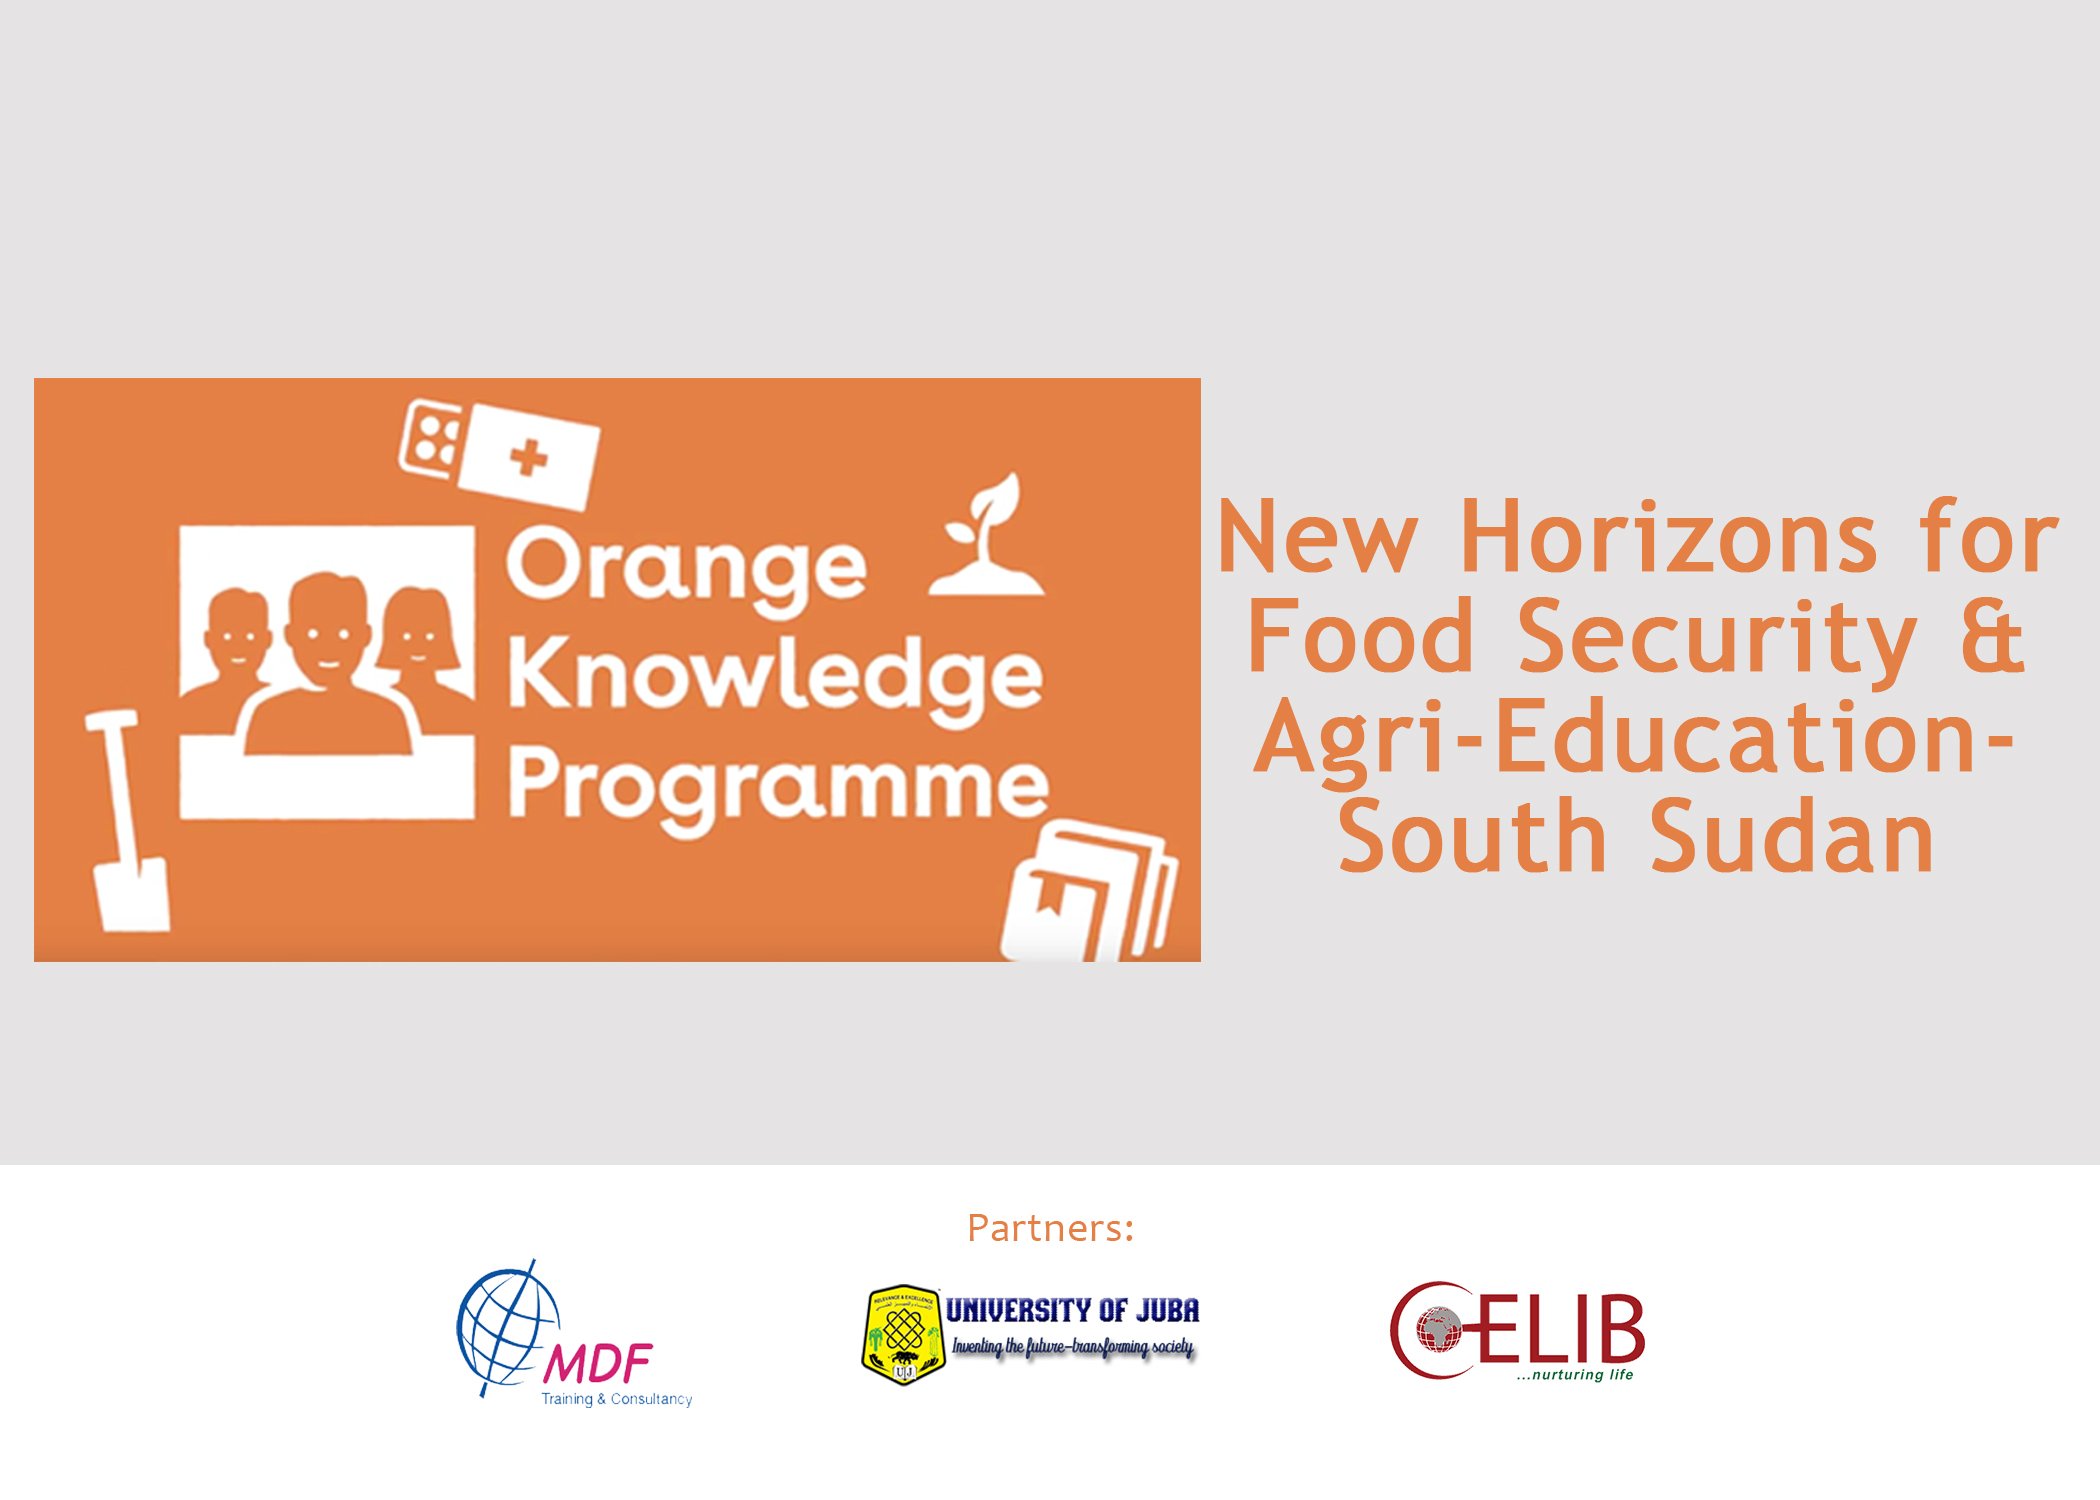 New horizon for Food Security and Agri-education in Southern Sudan